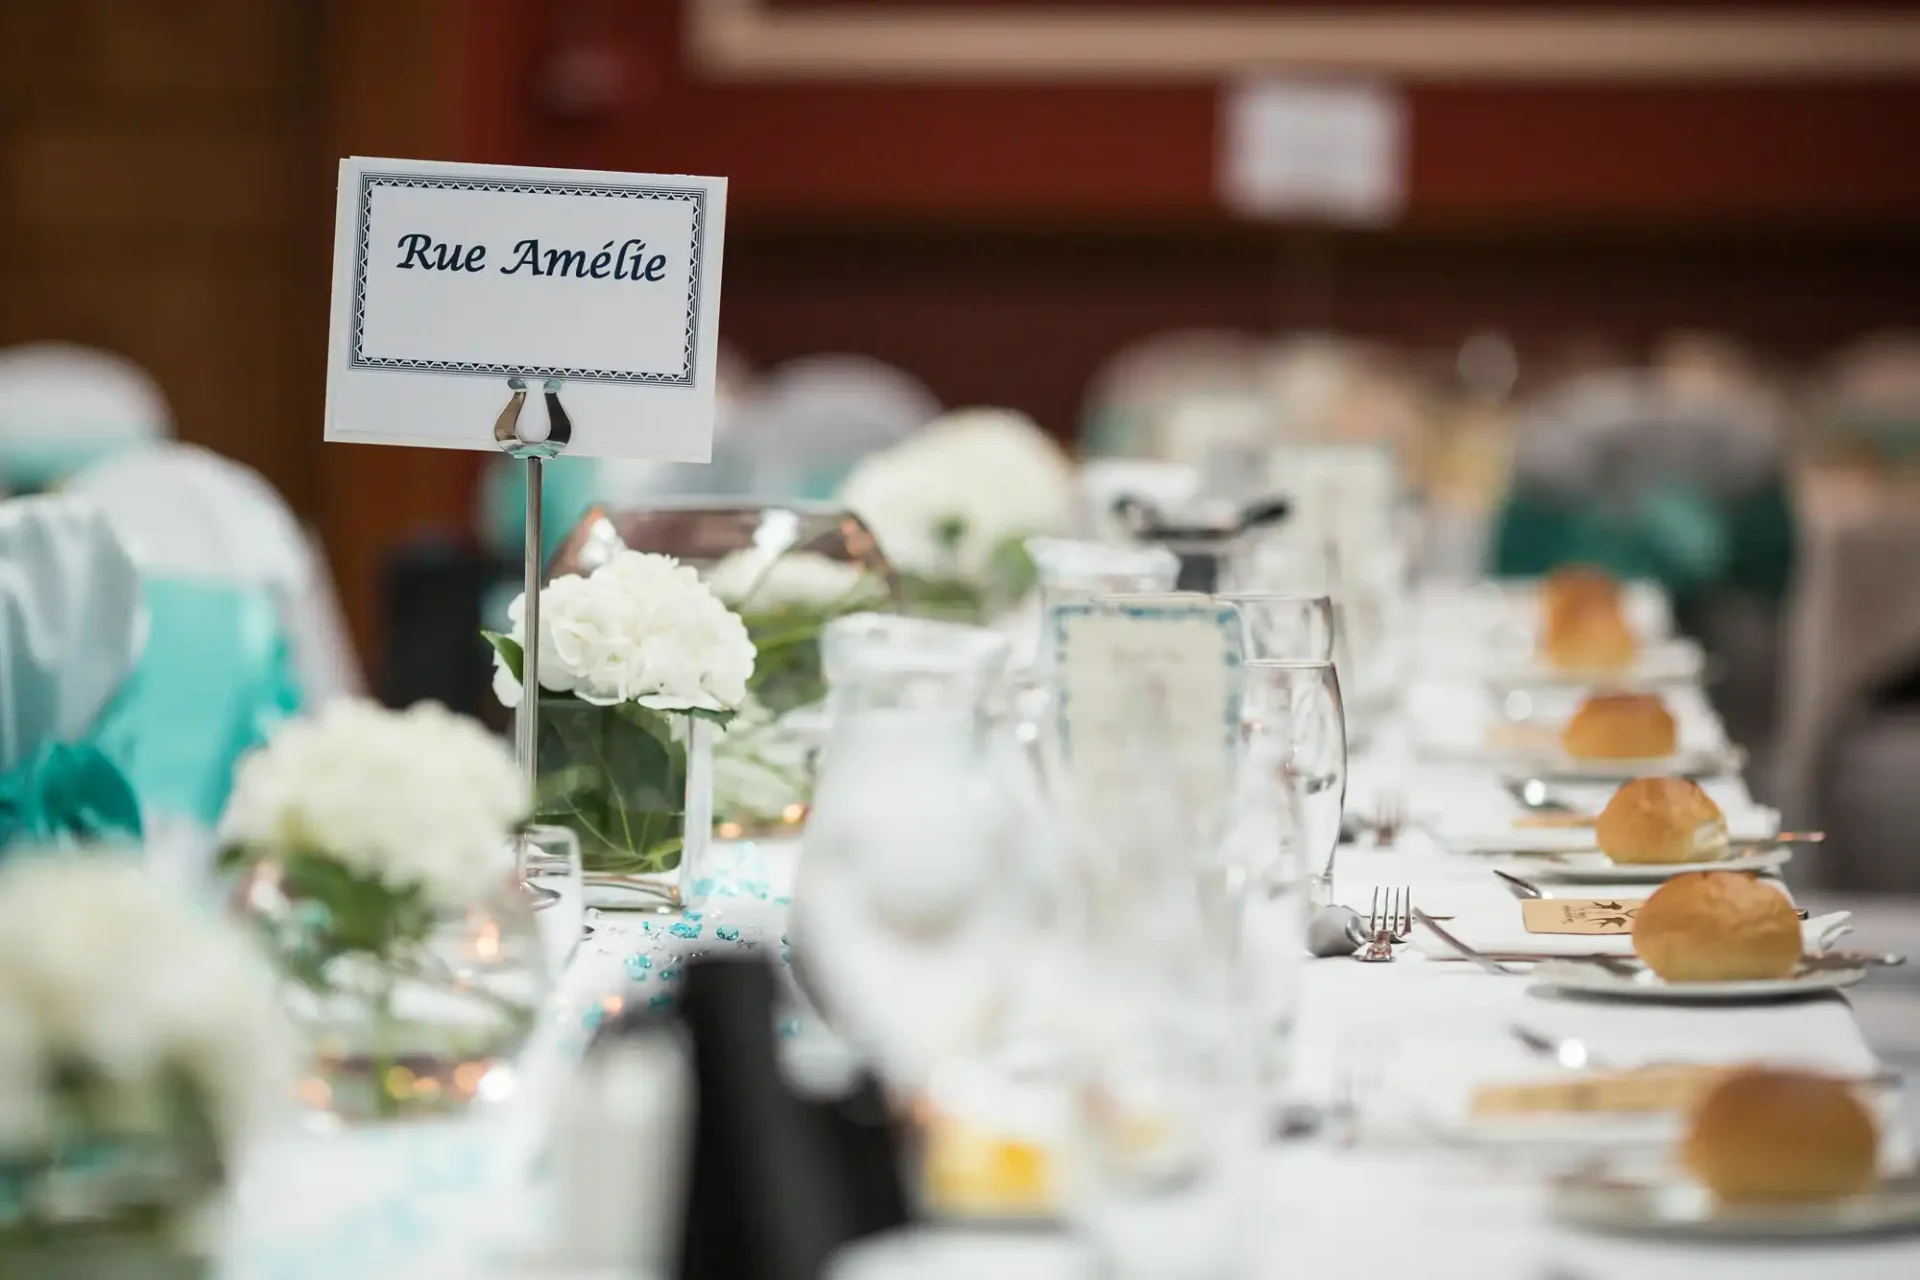 An elegantly set banquet table with white flowers and a sign reading "rue amélie" at a dinner event.